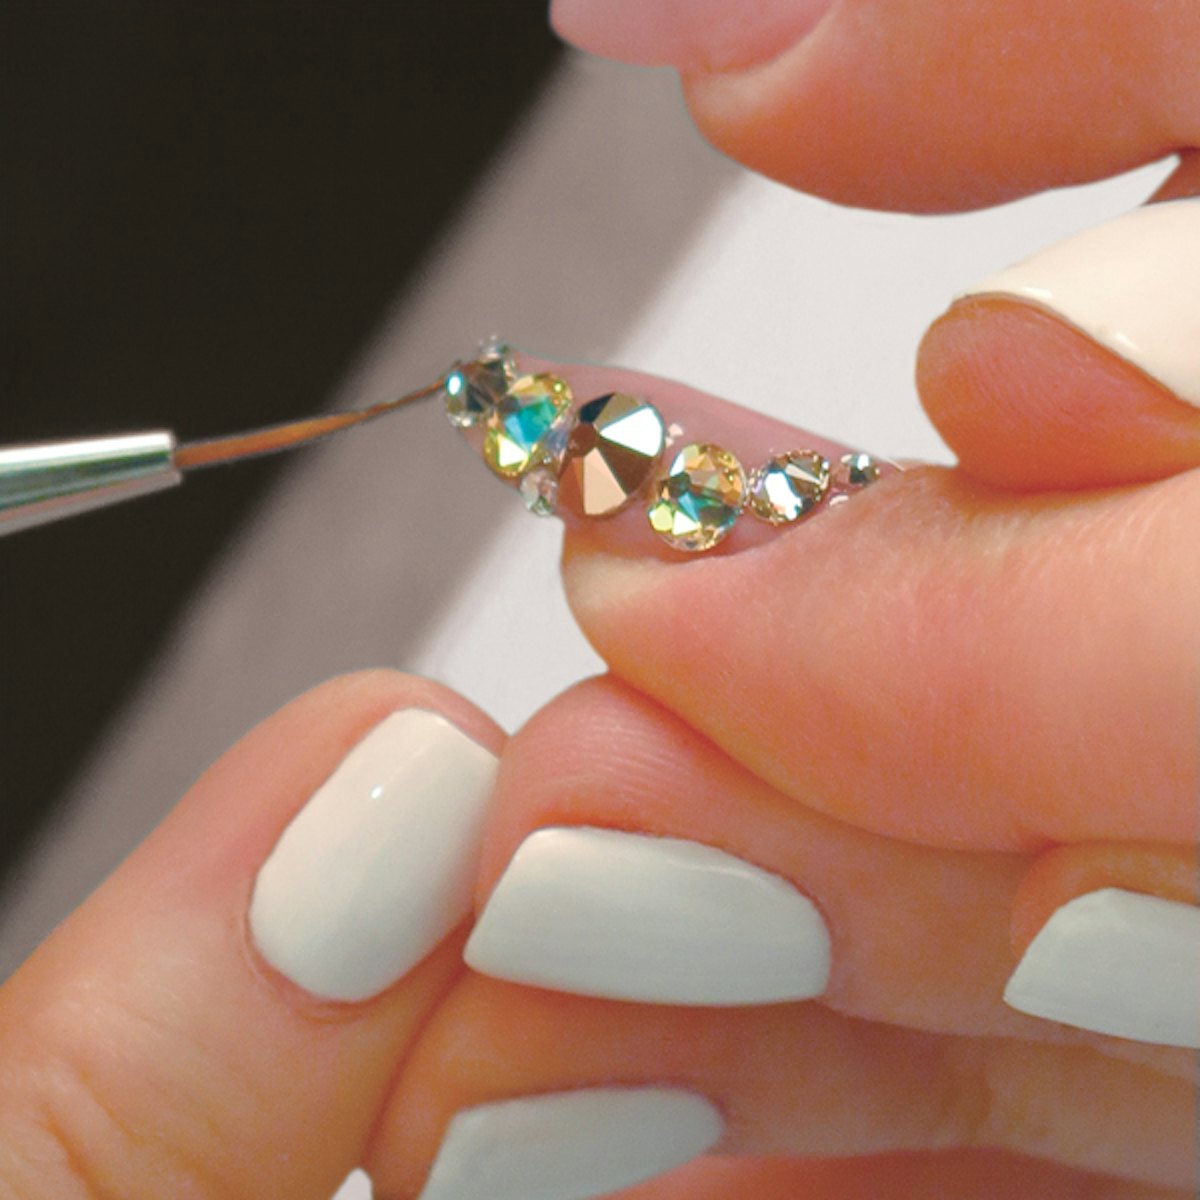 How to Attach Rhinestones to Nails: 13 Steps (with Pictures)